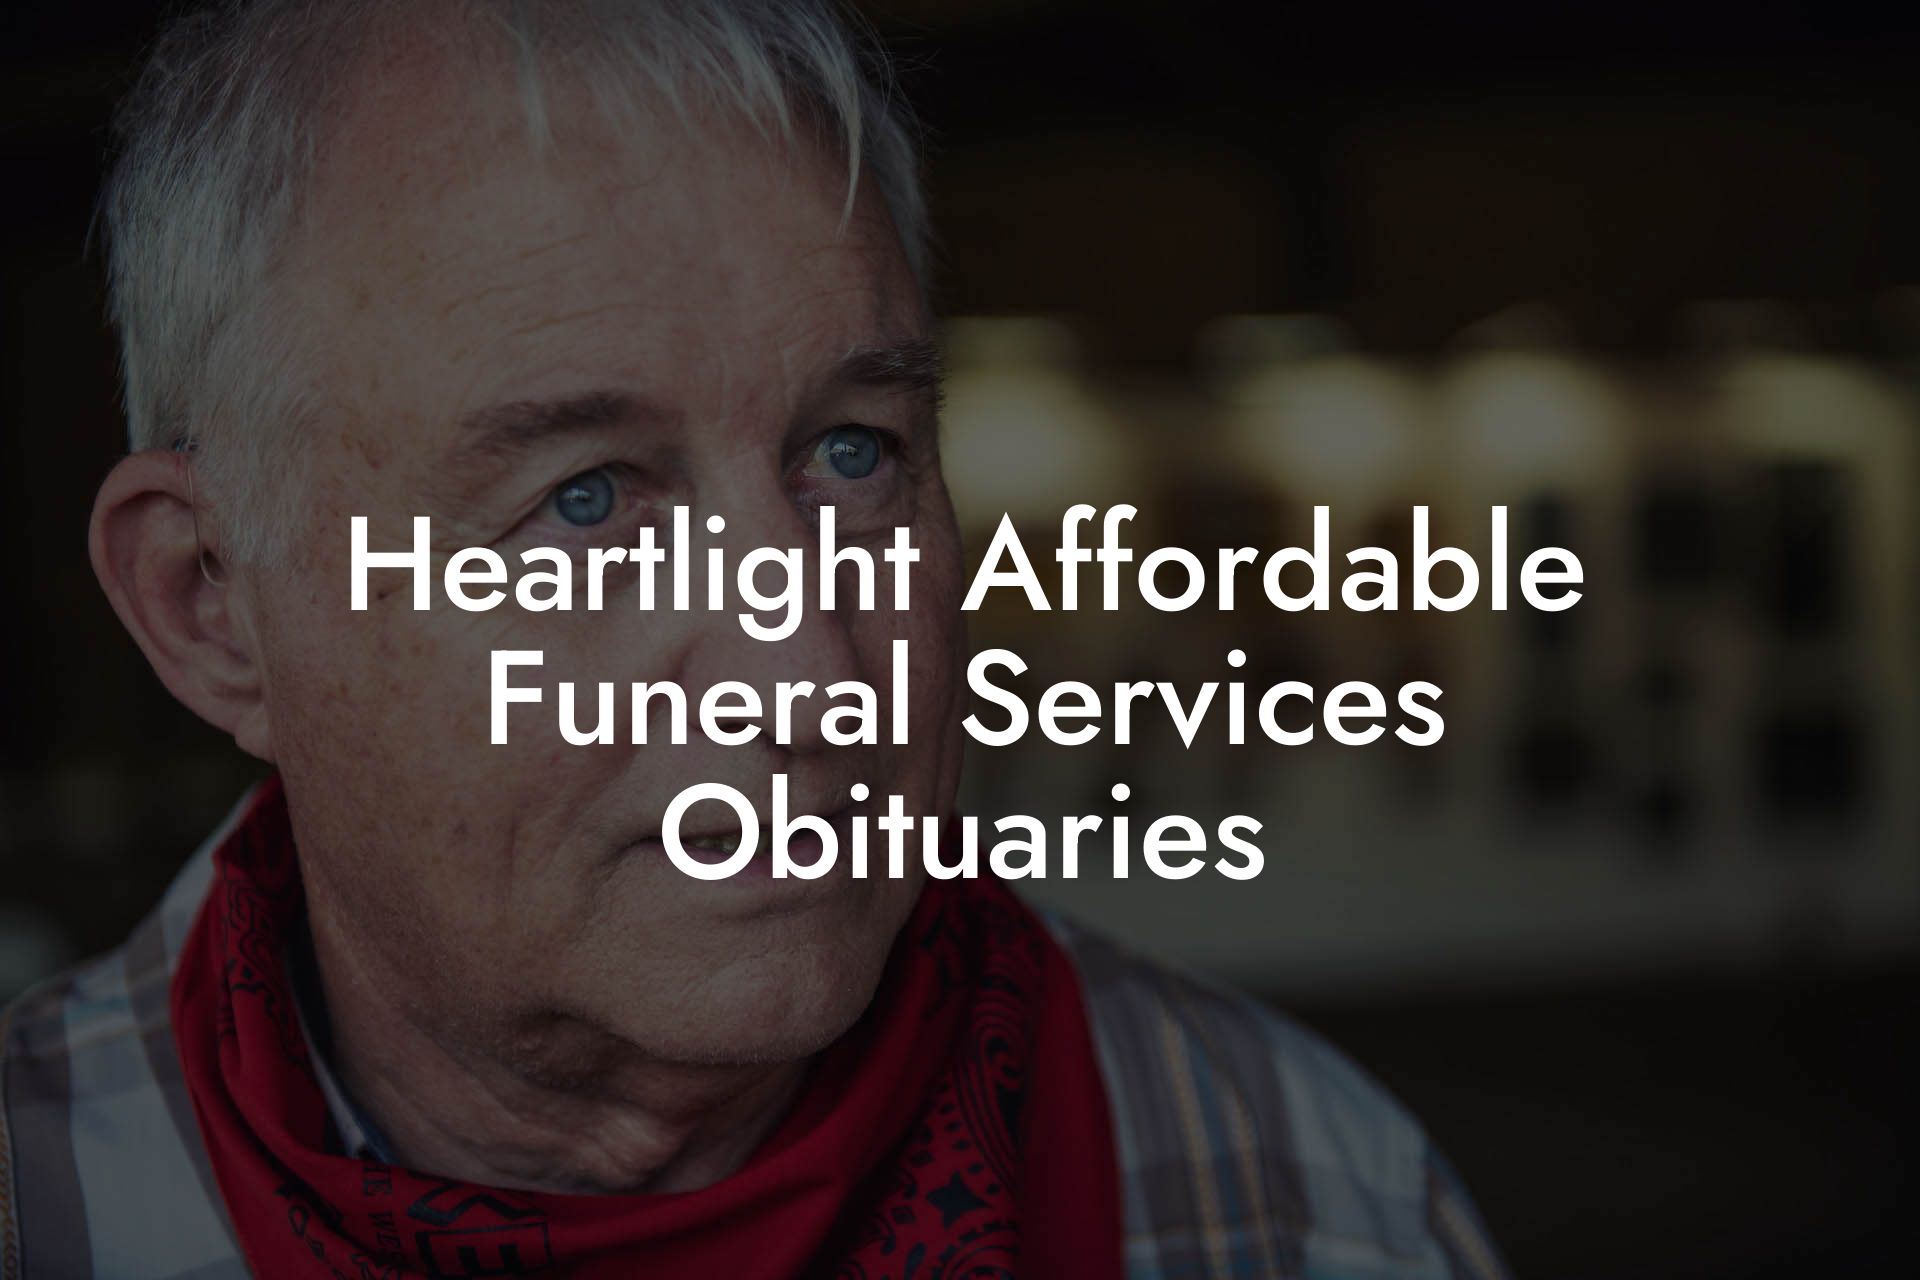 Heartlight Affordable Funeral Services Obituaries